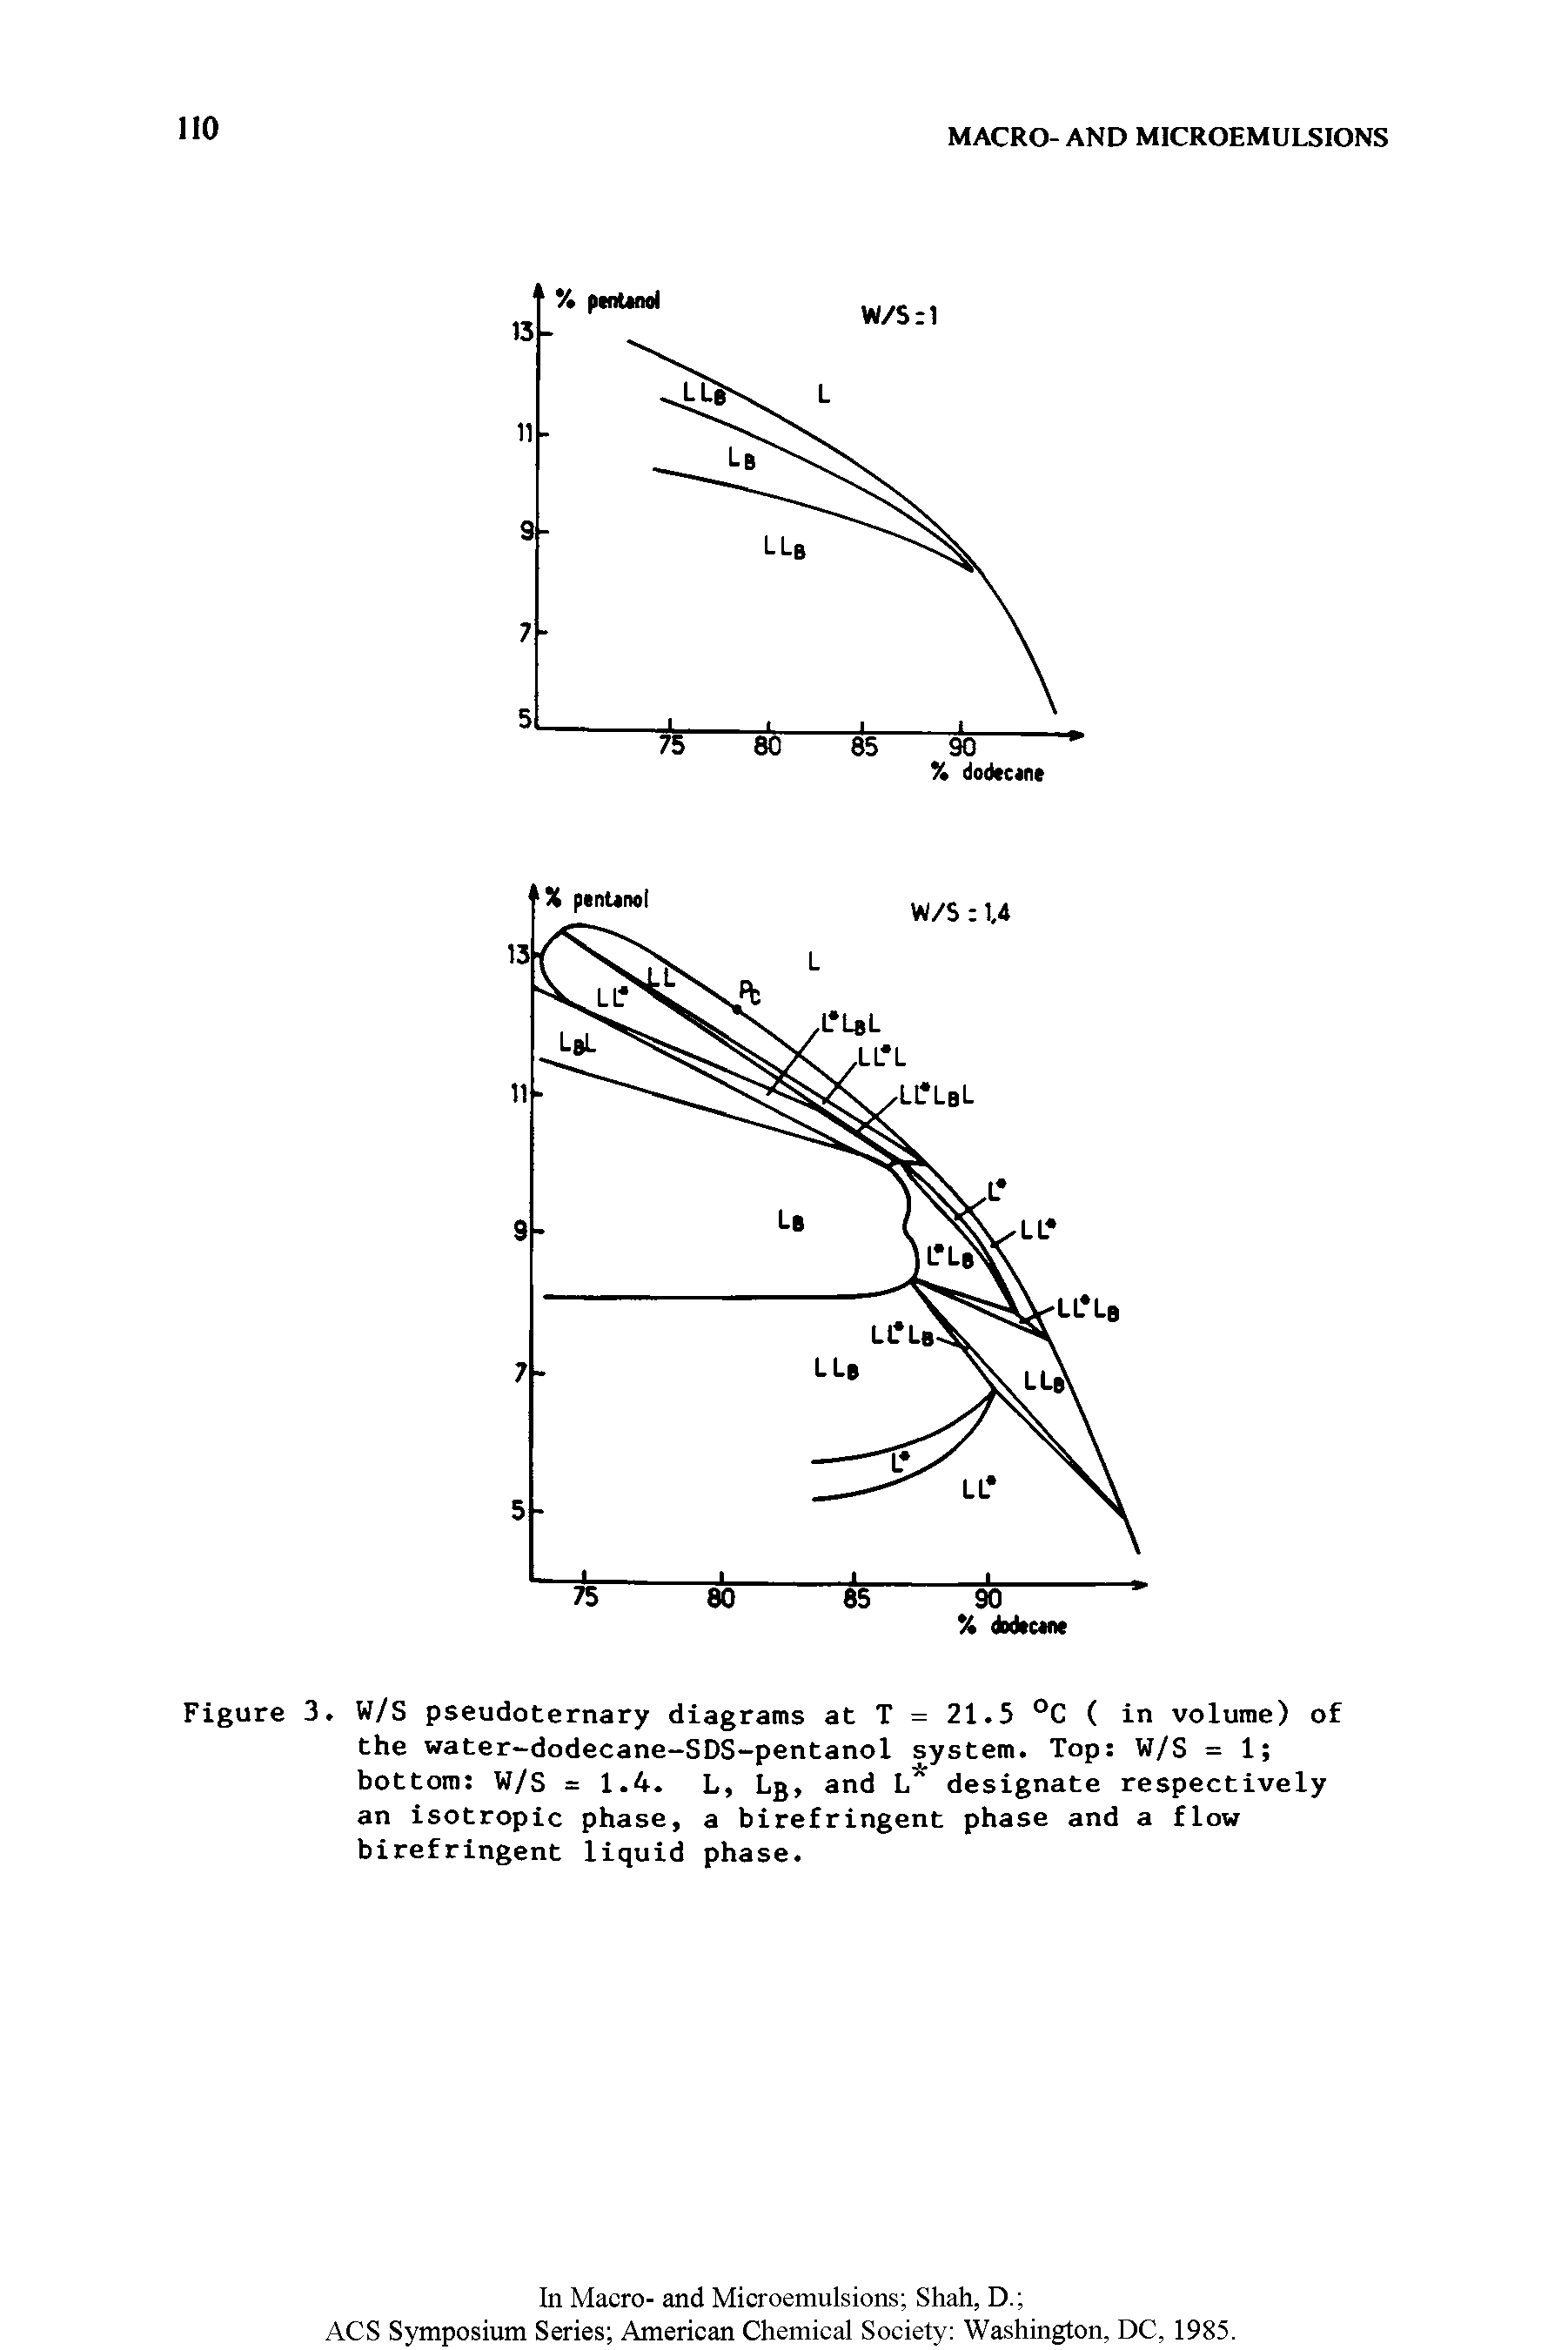 Figure 3. W/S pseudoternary diagrams at T = 21.5 °C ( in volume) of the water-dodecane-SDS-pentanol system. Top W/S = 1 bottom W/S = 1.4. L, Lg, and L designate respectively an isotropic phase, a birefringent phase and a flow birefringent liquid phase.